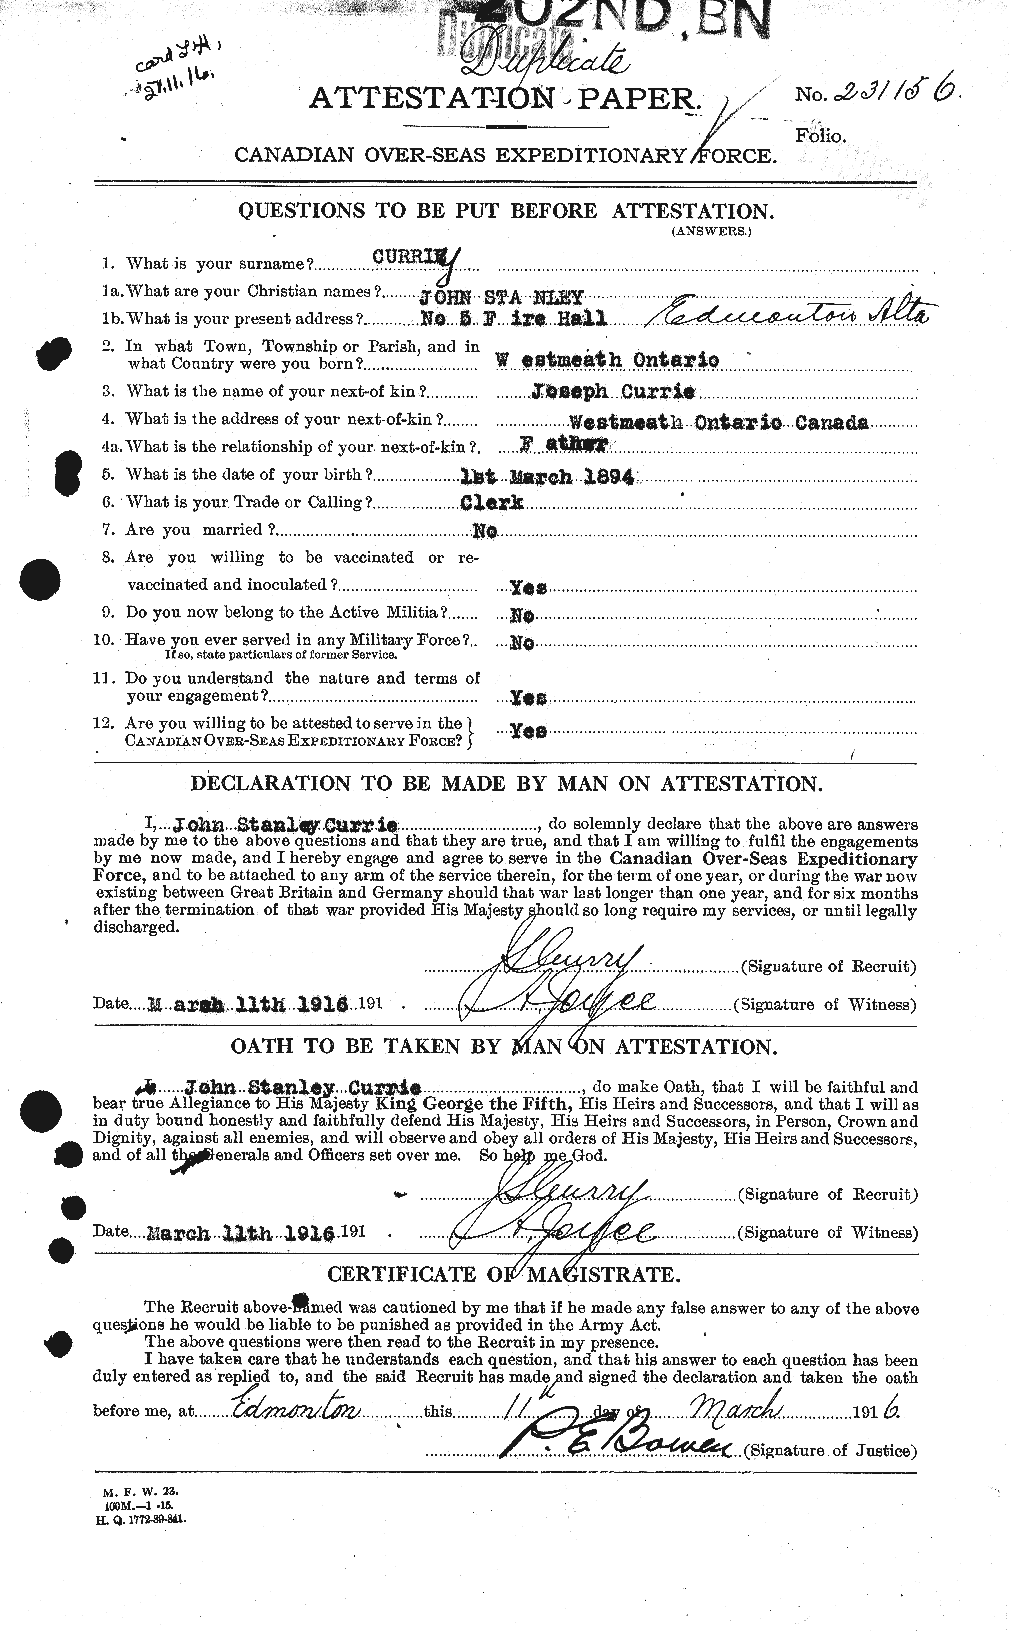 Personnel Records of the First World War - CEF 070980a